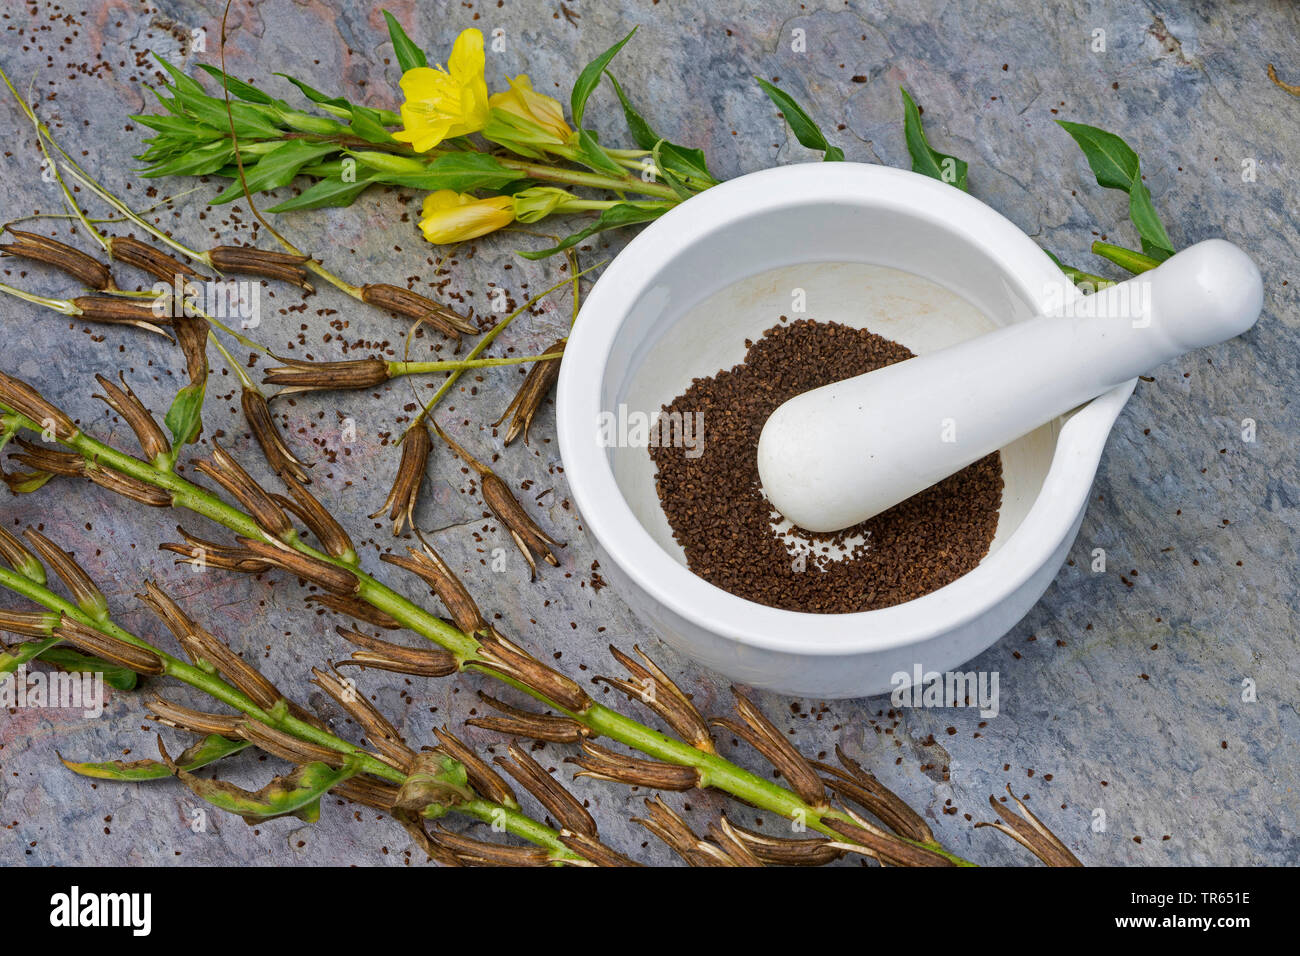 common evening primrose (Oenothera biennis), seed in a mortar, production of a evening primrose oil, Germany Stock Photo